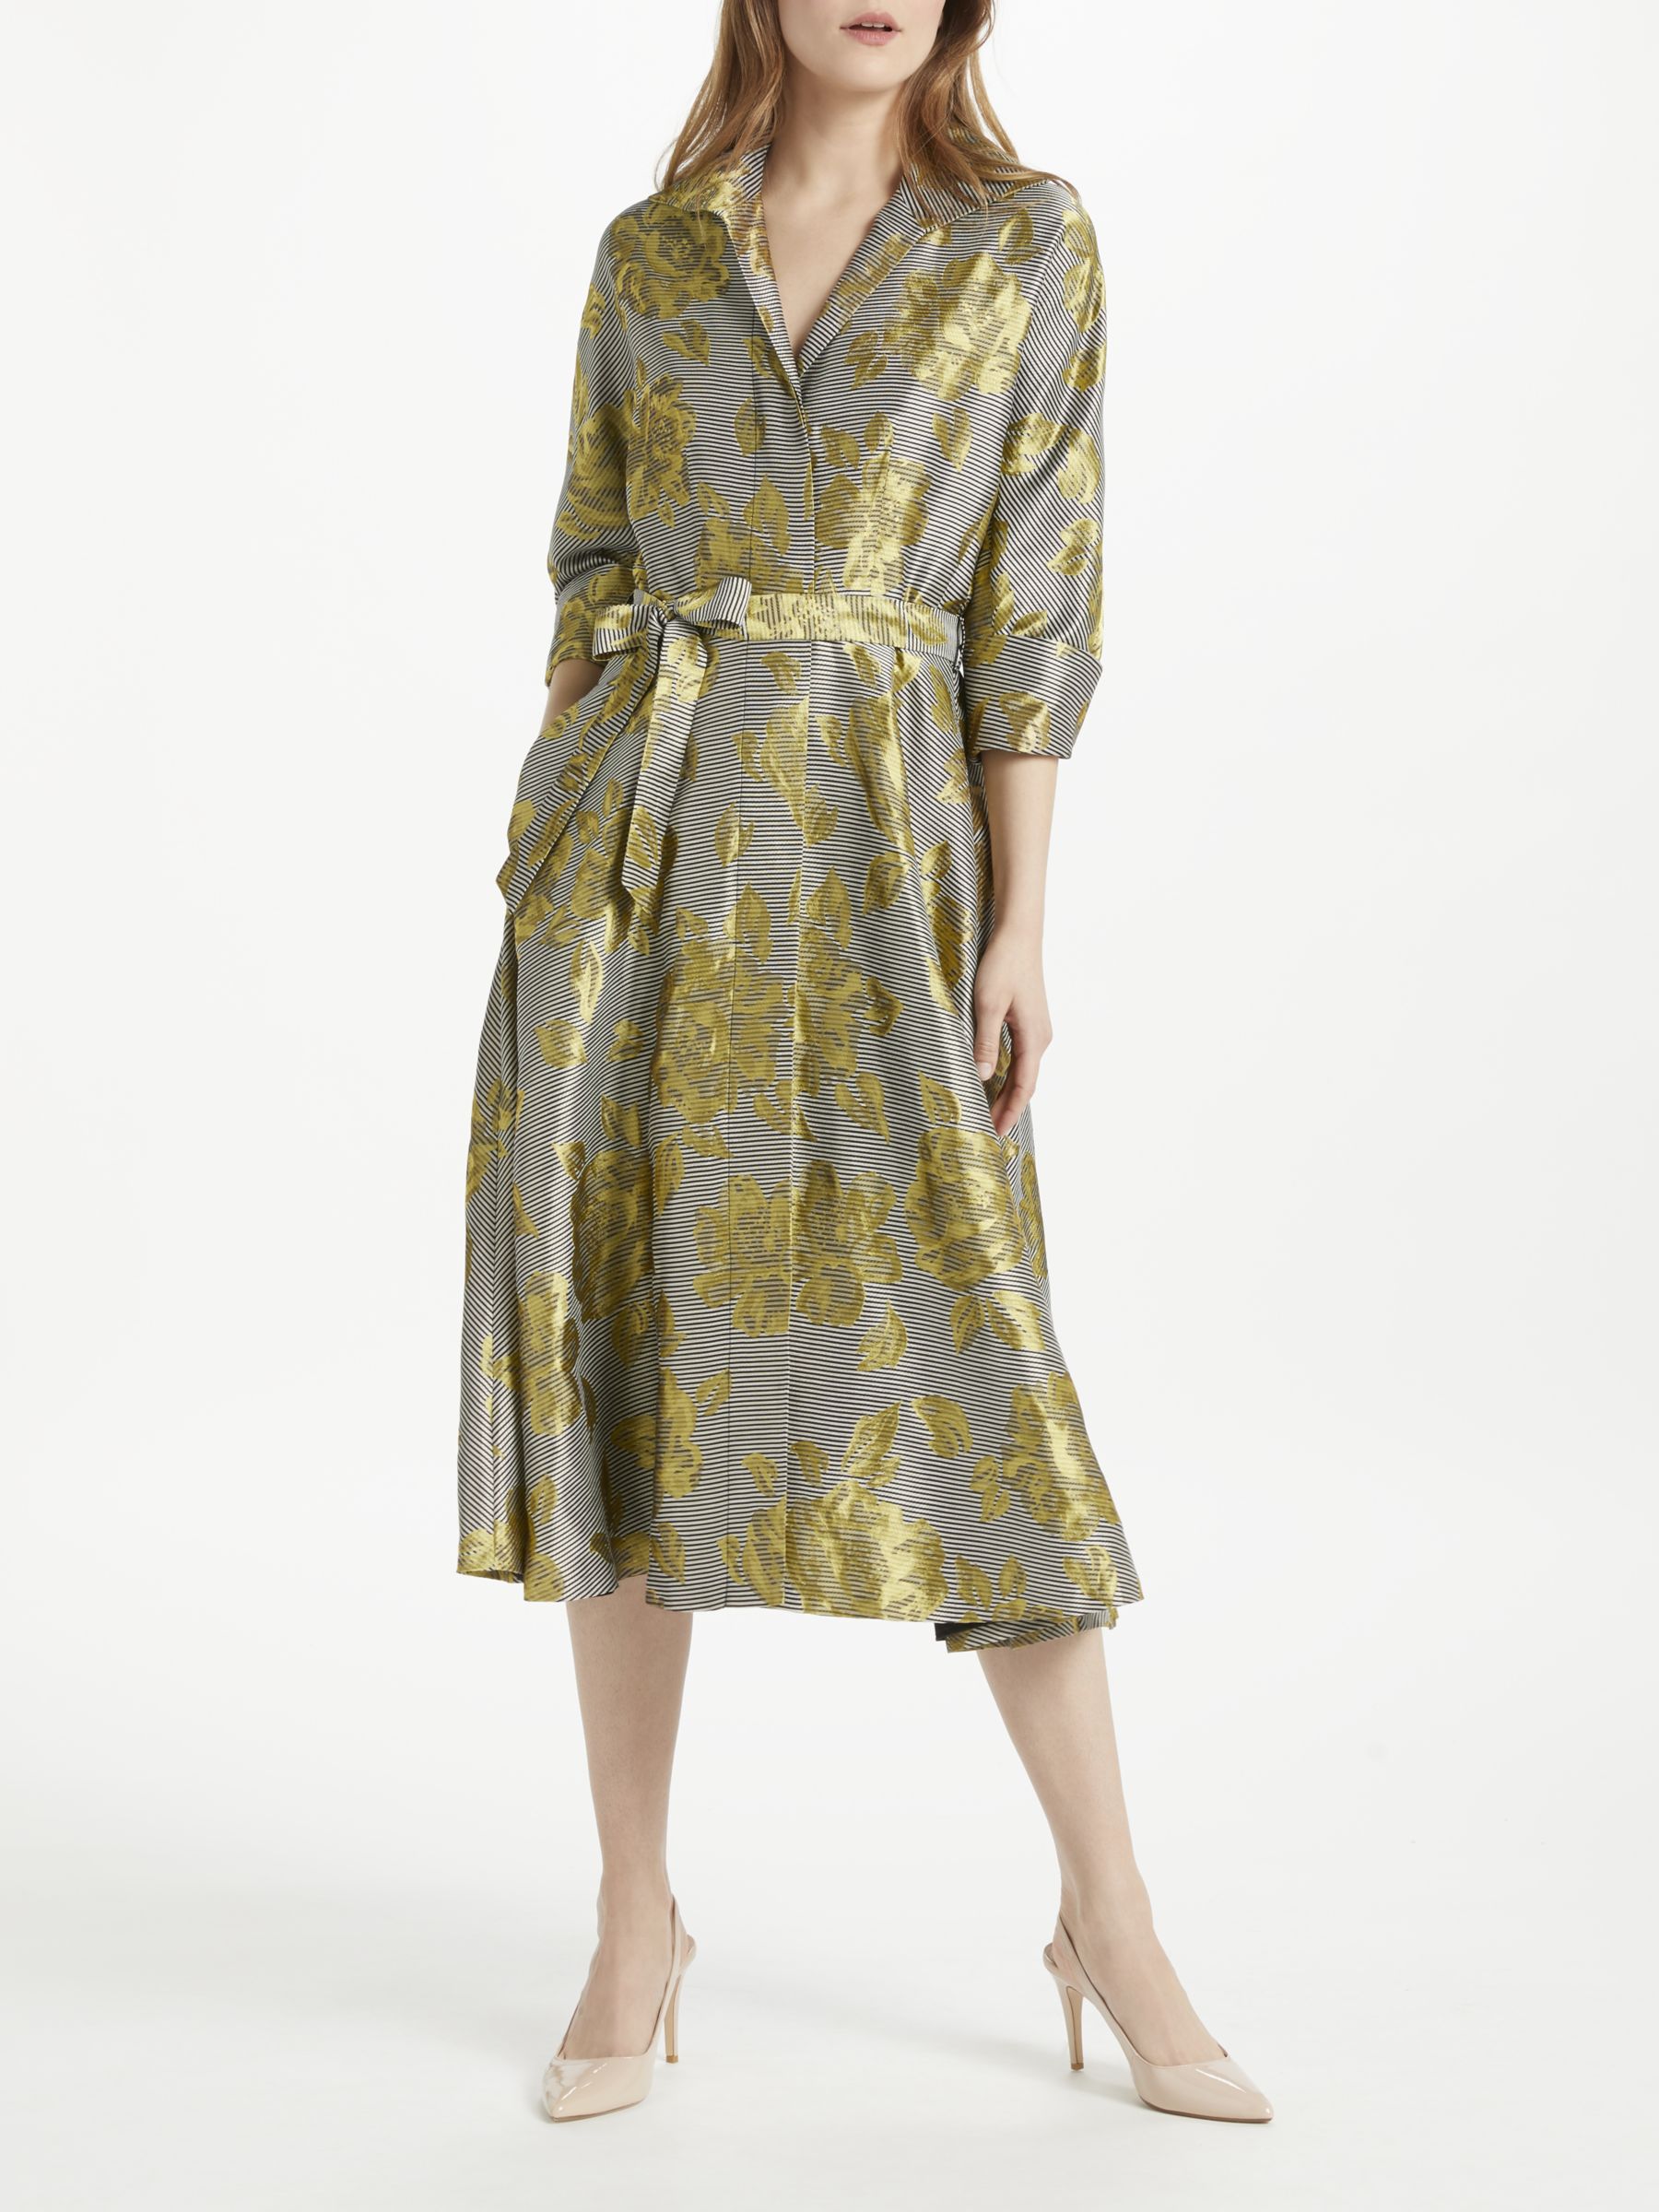 Bruce by Bruce Oldfield Floral Jacquard Shirt Dress, Yellow/Black at ...